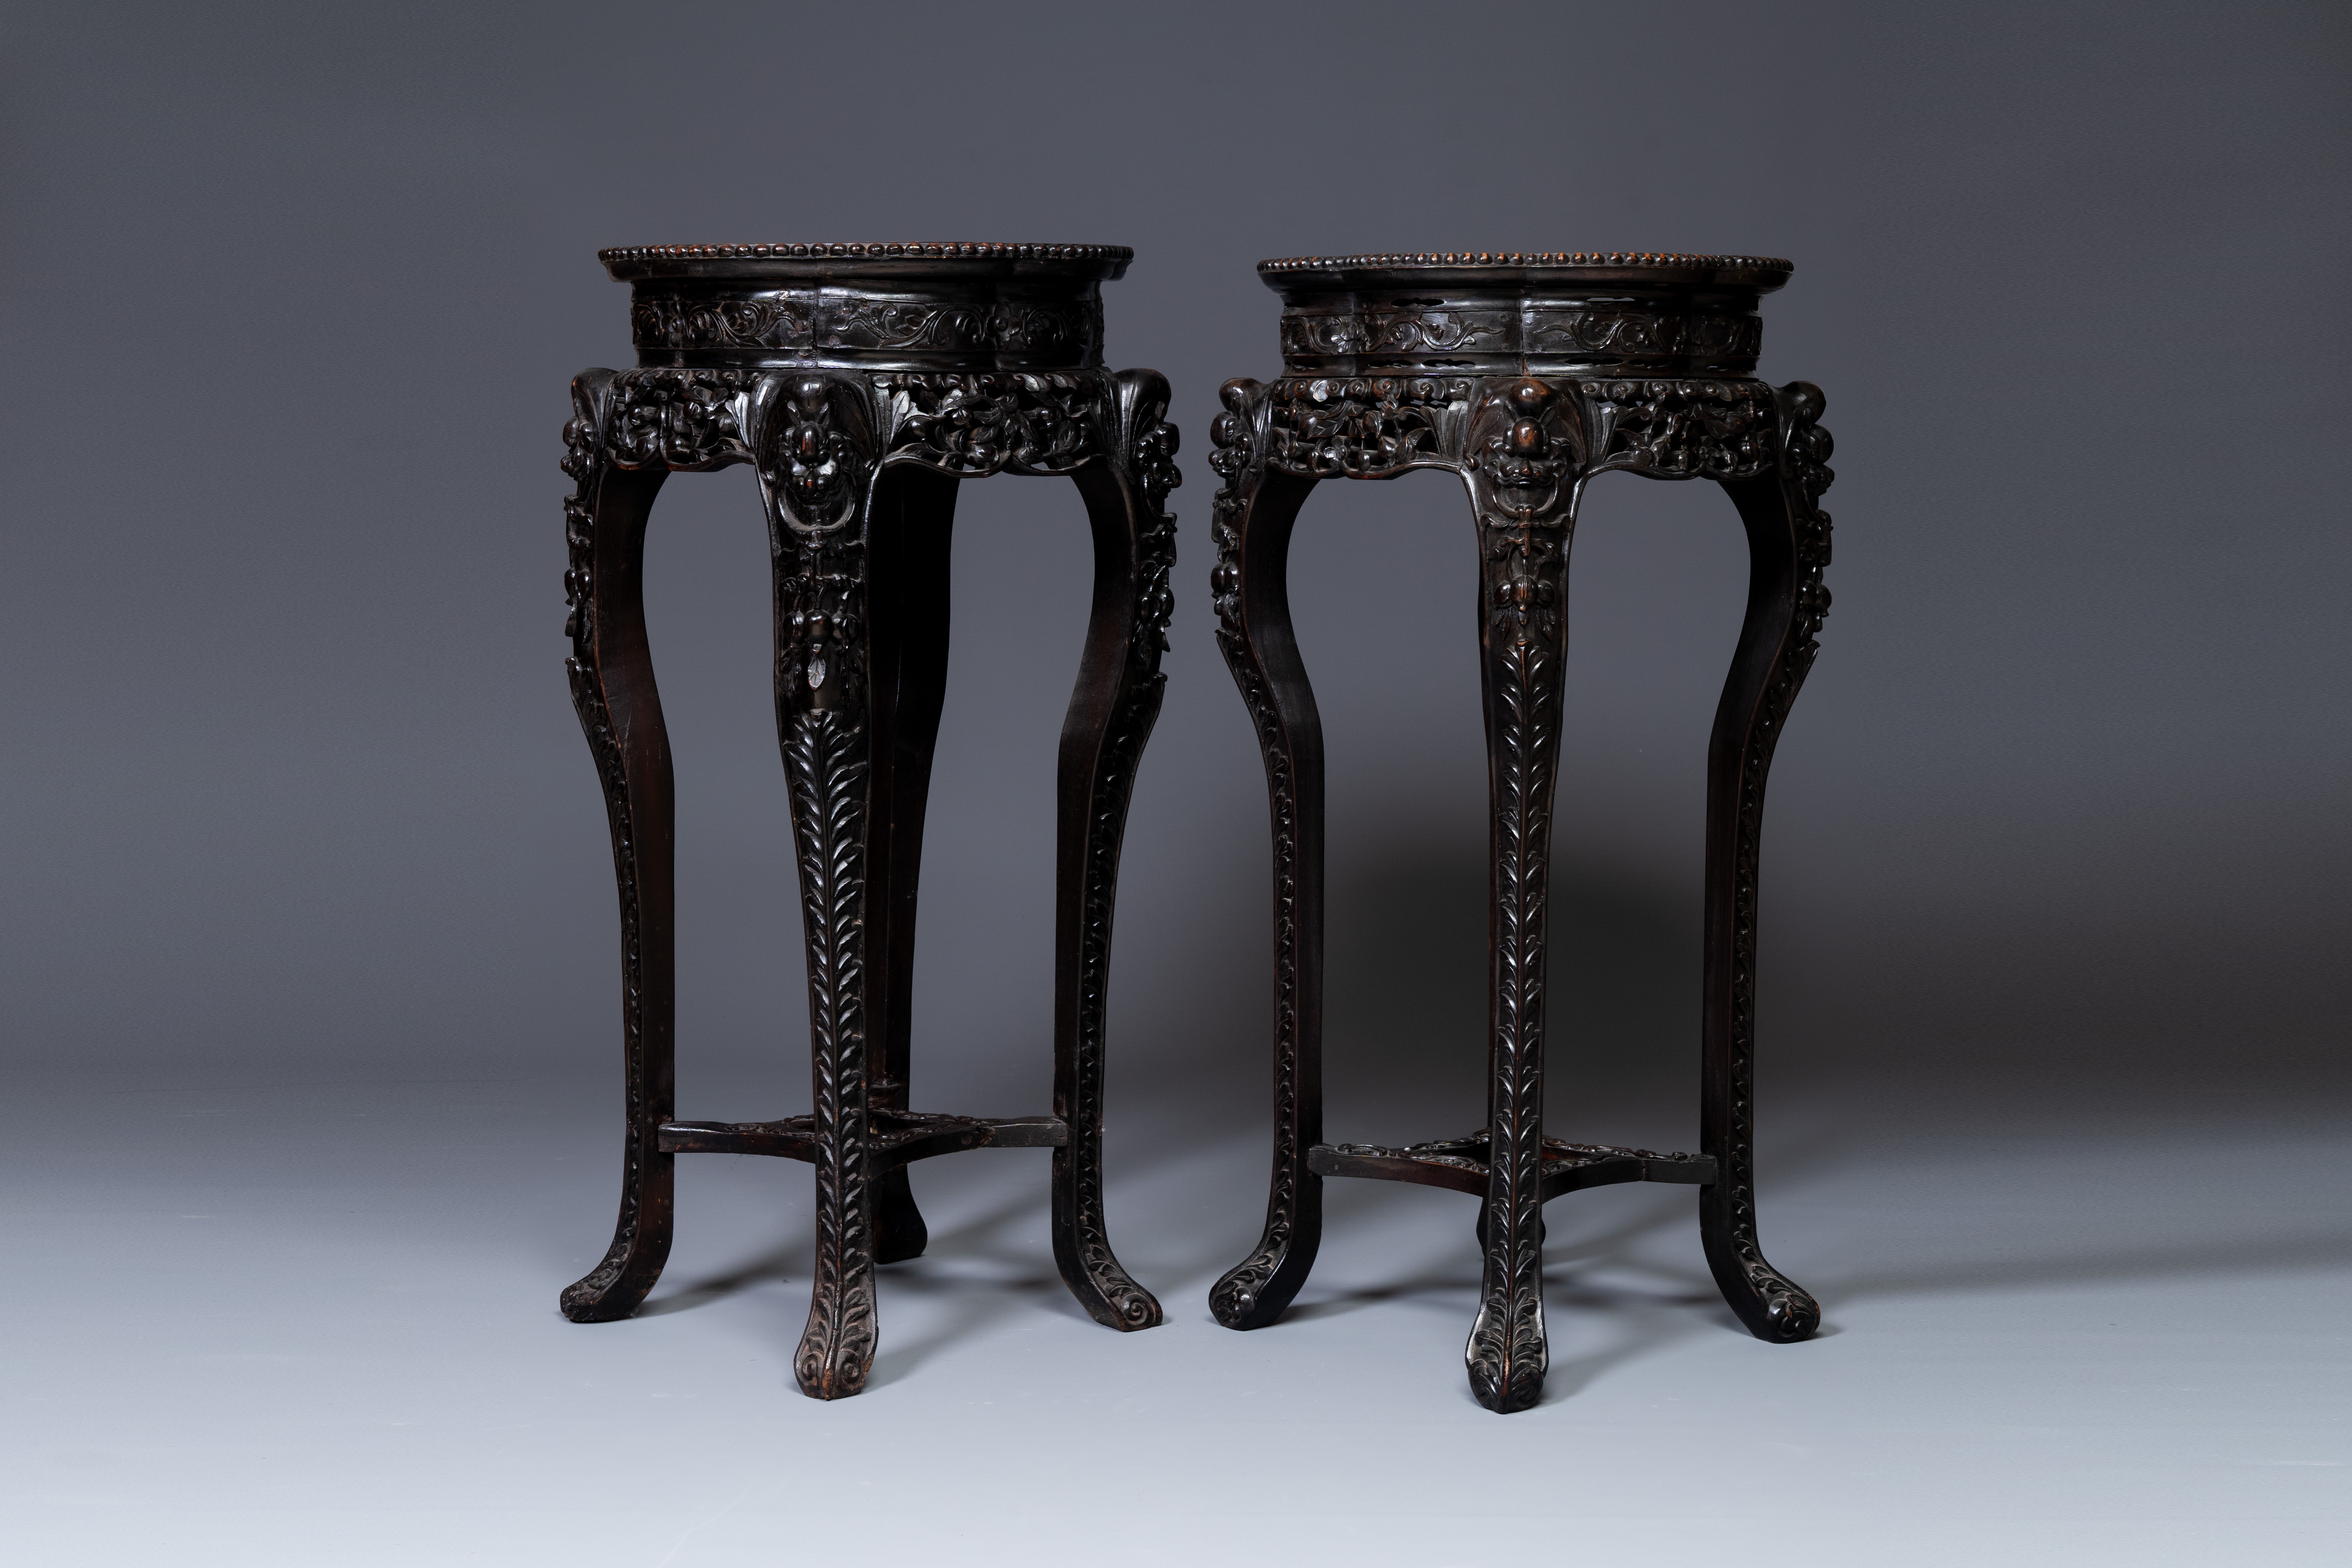 A pair of tall Chinese carved wooden stands with marble tops, 19th C. - Image 2 of 5